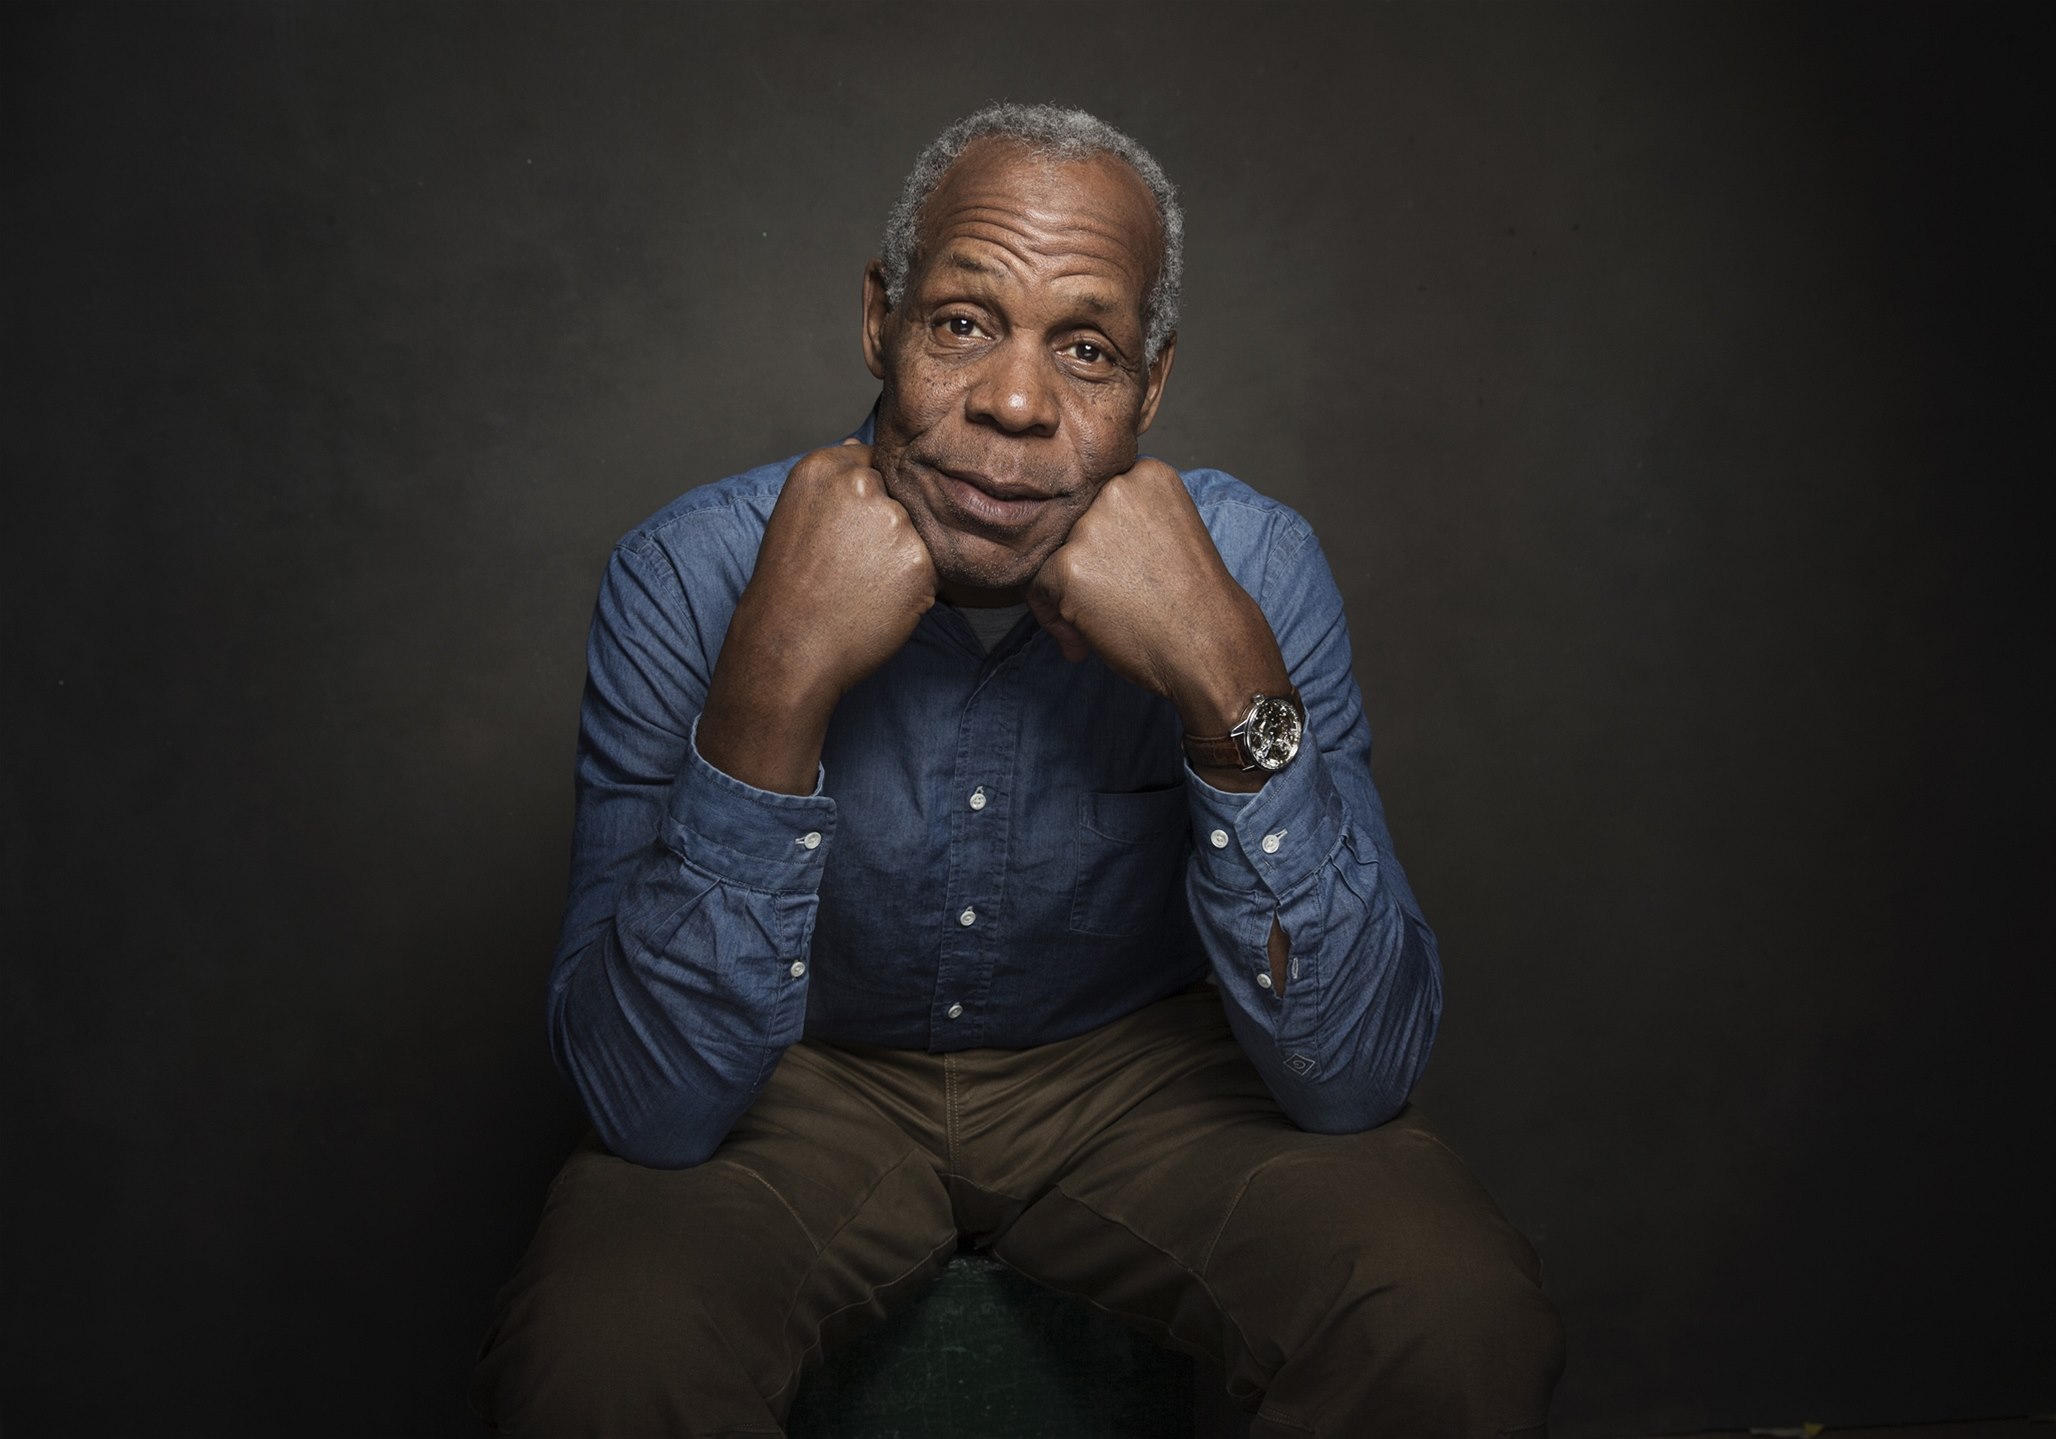 Download free Wallpapers of Danny Glover in high resolution and high qualit...